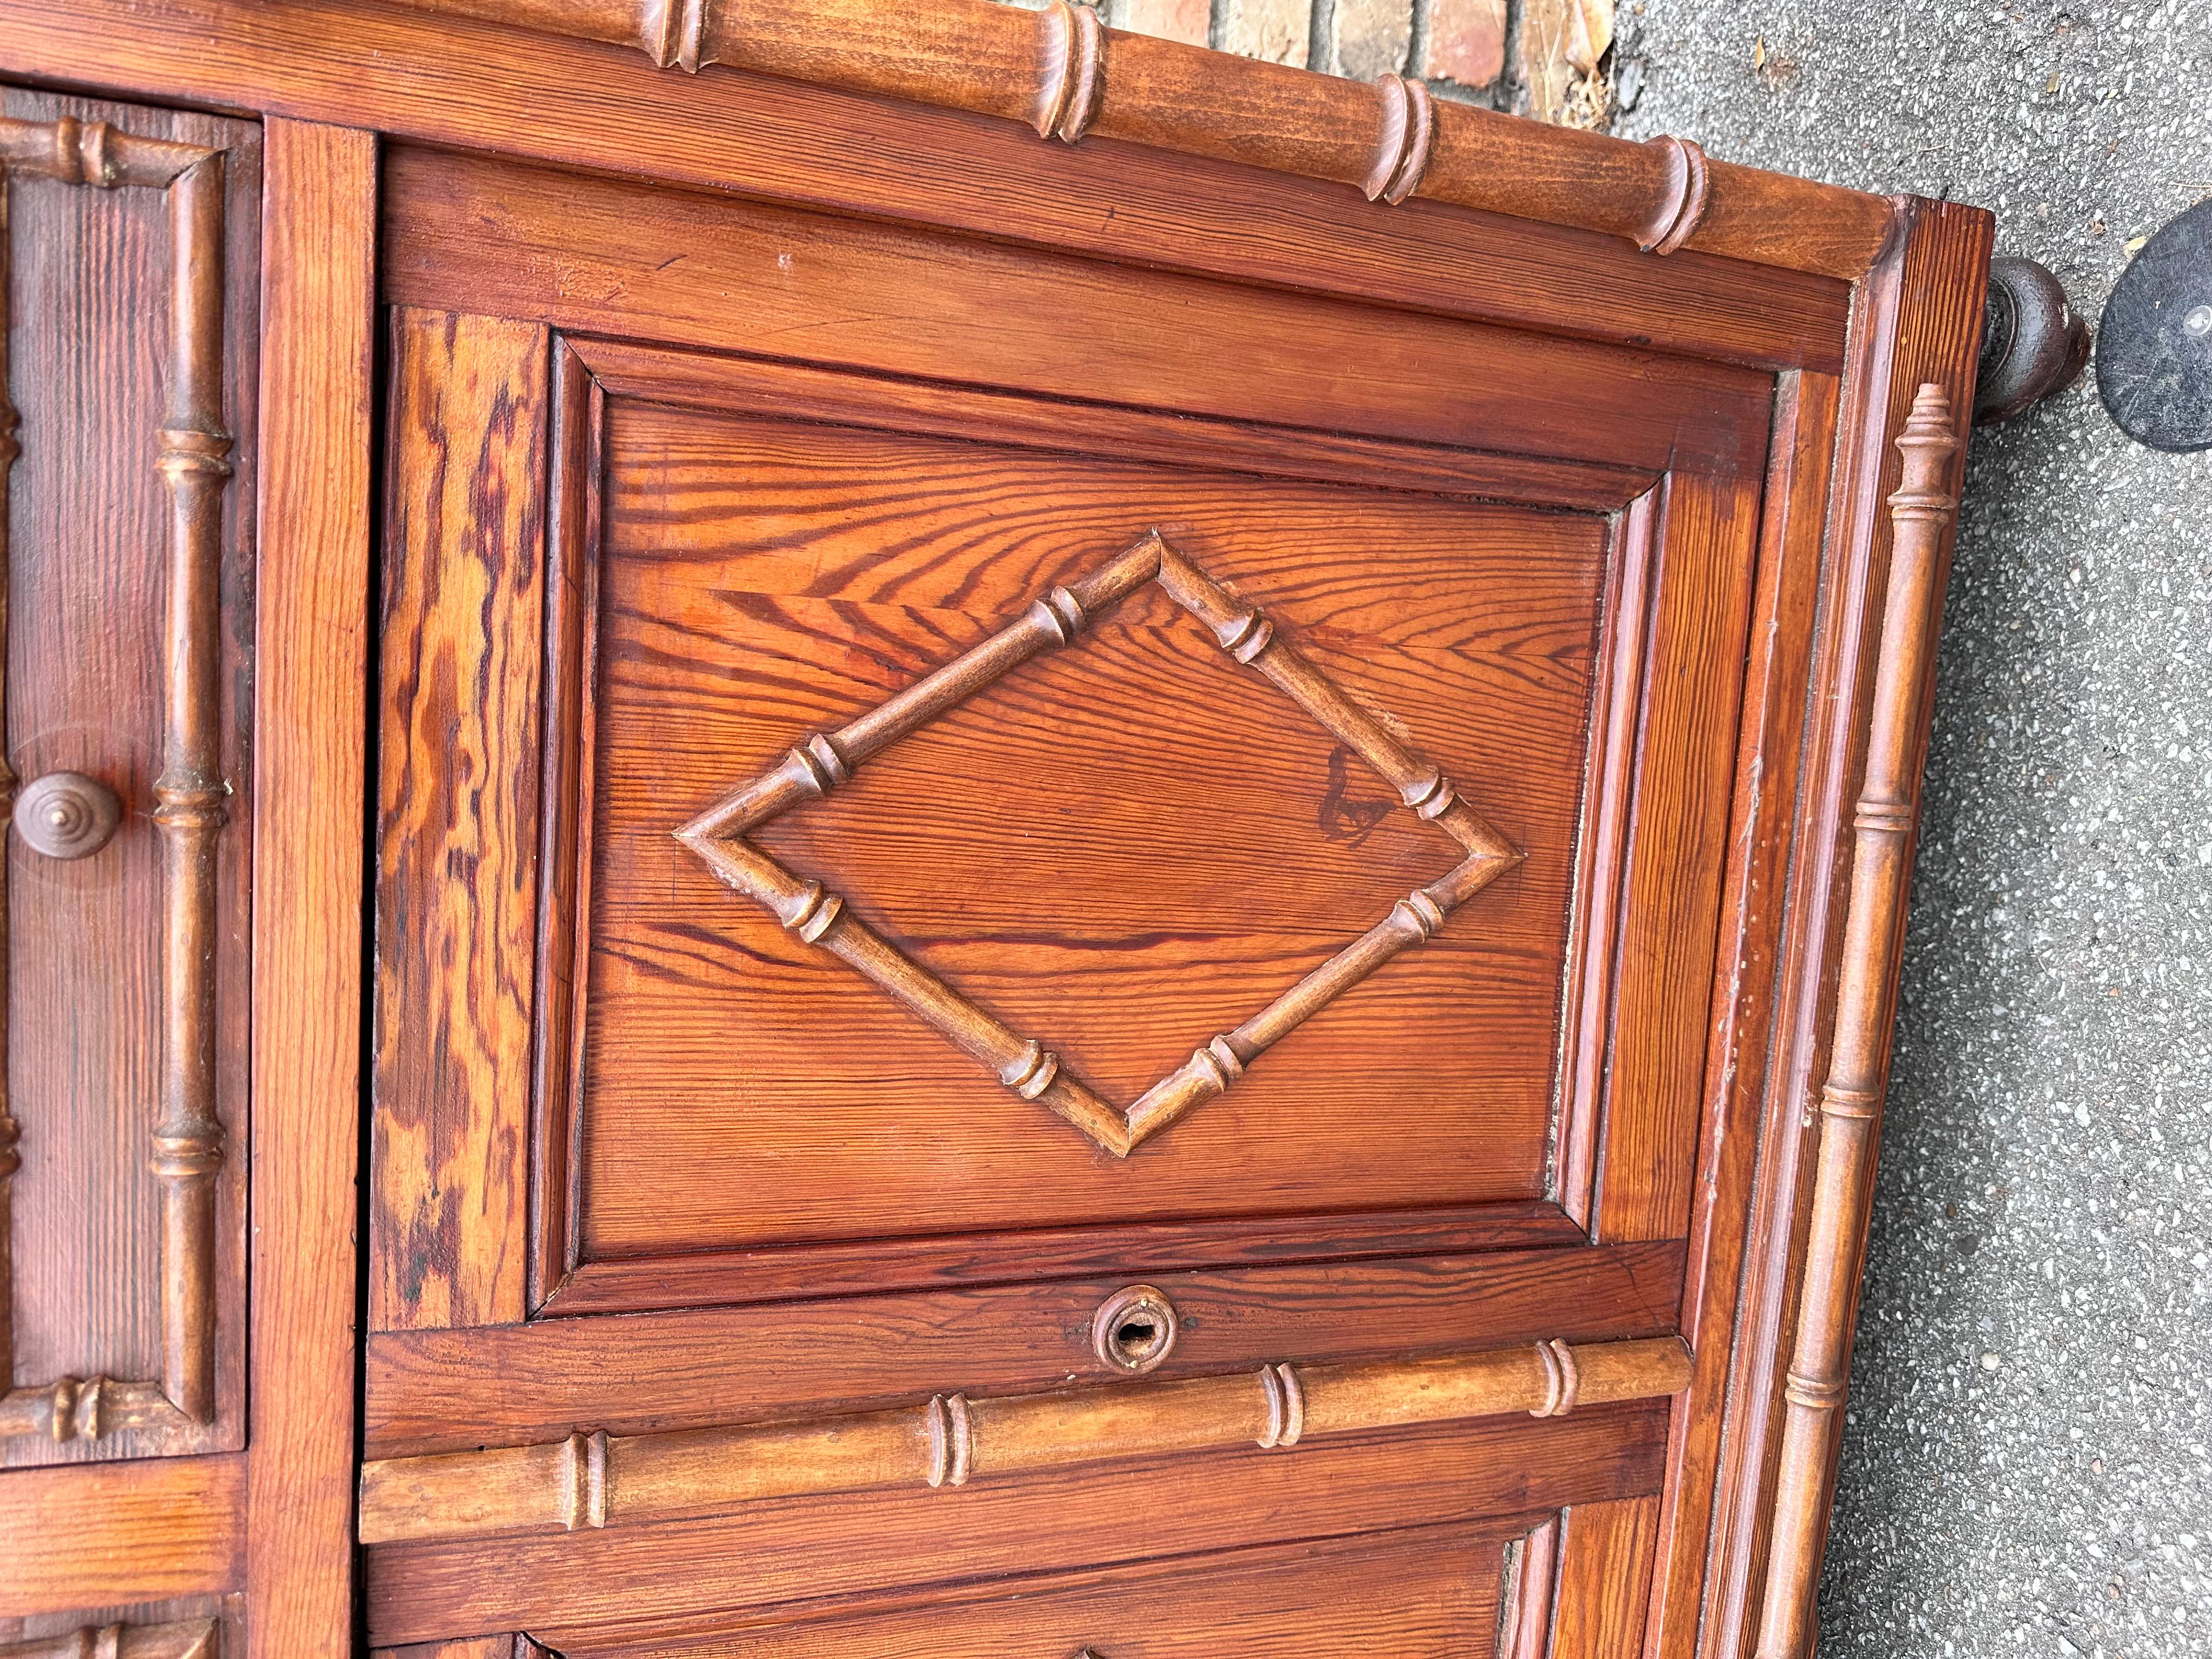 his is a beautiful faux bamboo cupboard! Of French make, this piece has all the typical charm of that style. Lovely glow and patina in the wood, and the hand carved diamond detailing on the drawers and the carved bamboo representation all add to the